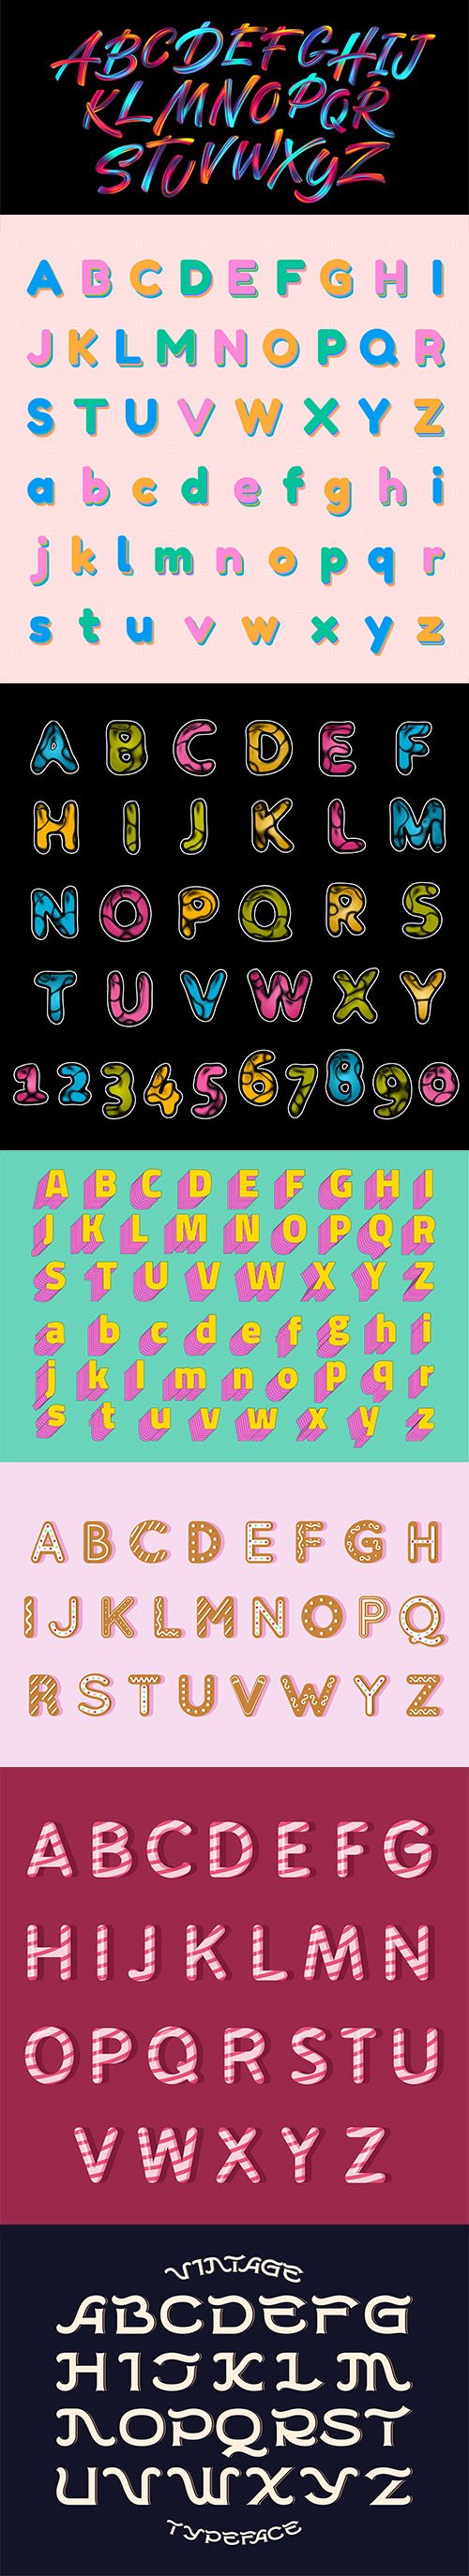 Alphabet collection of vector fonts